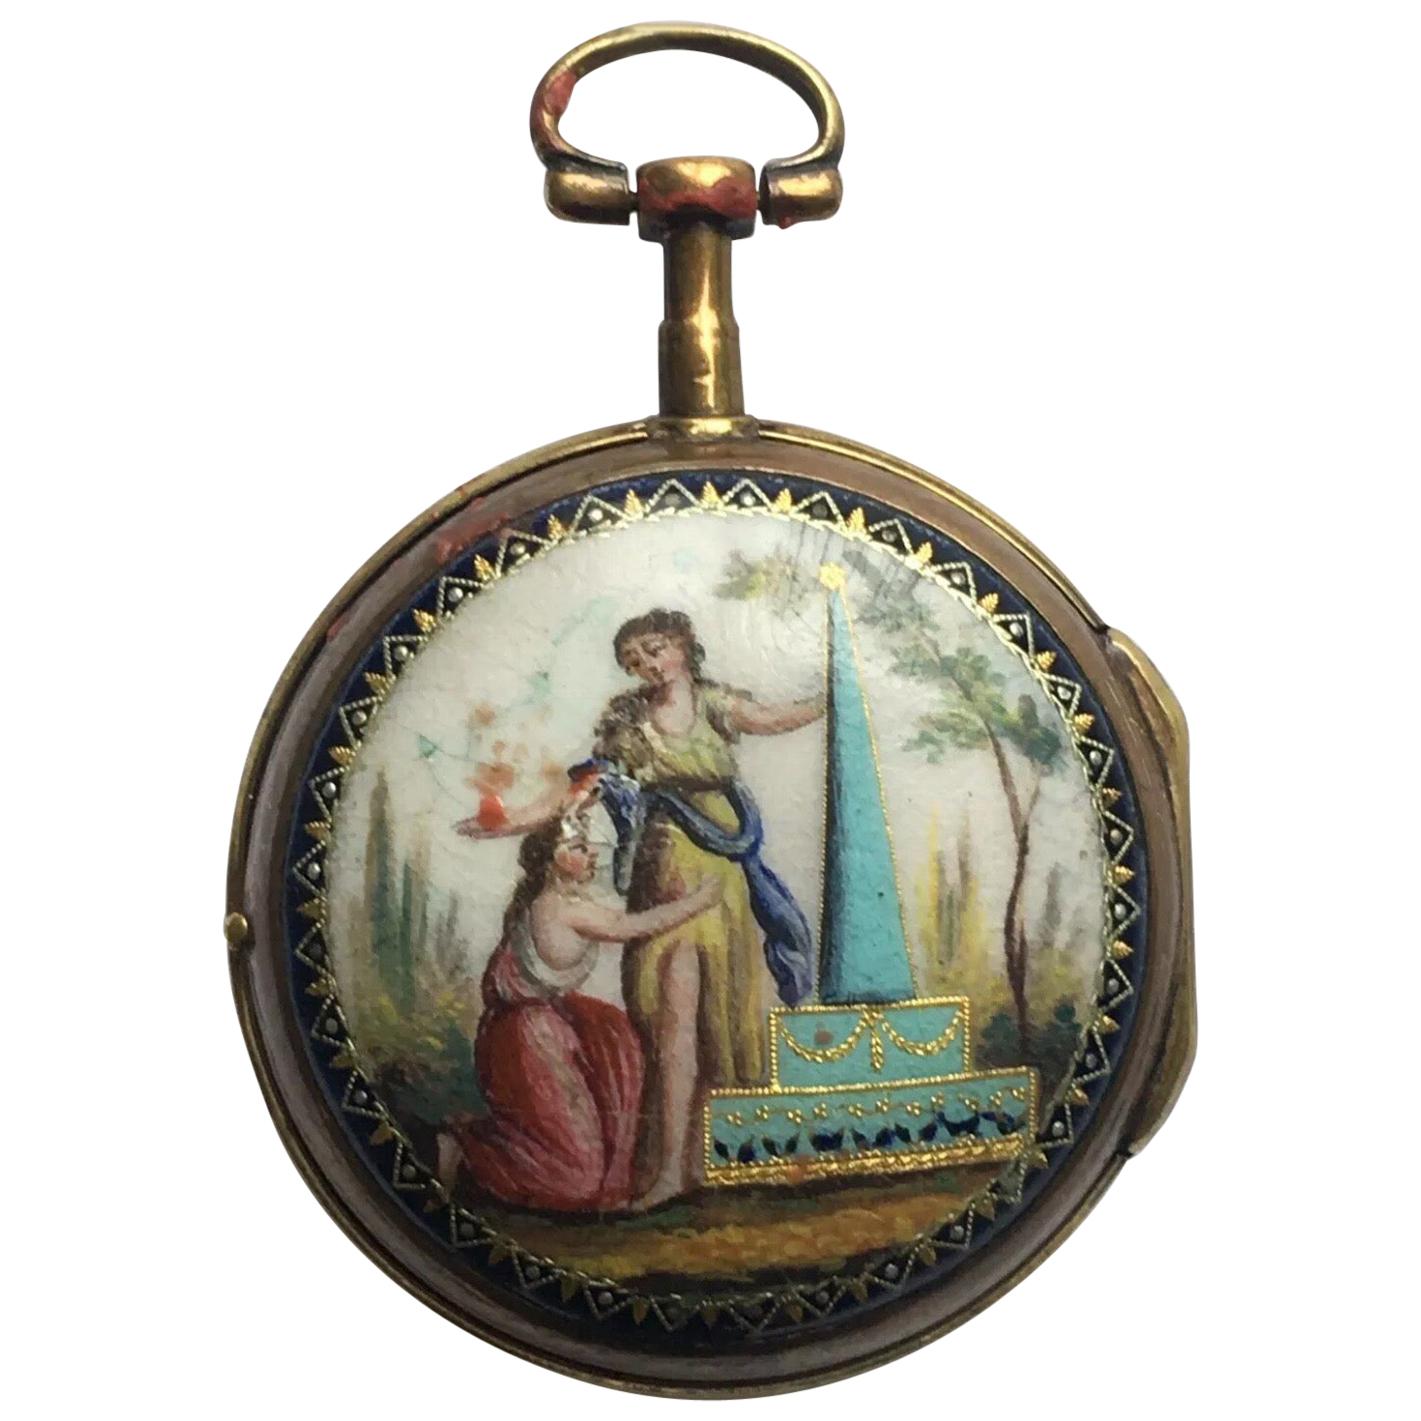 Early Rare Verge Fusee Enamel Pocket Watch Signed Van.Den.Bruel A Lille For Sale